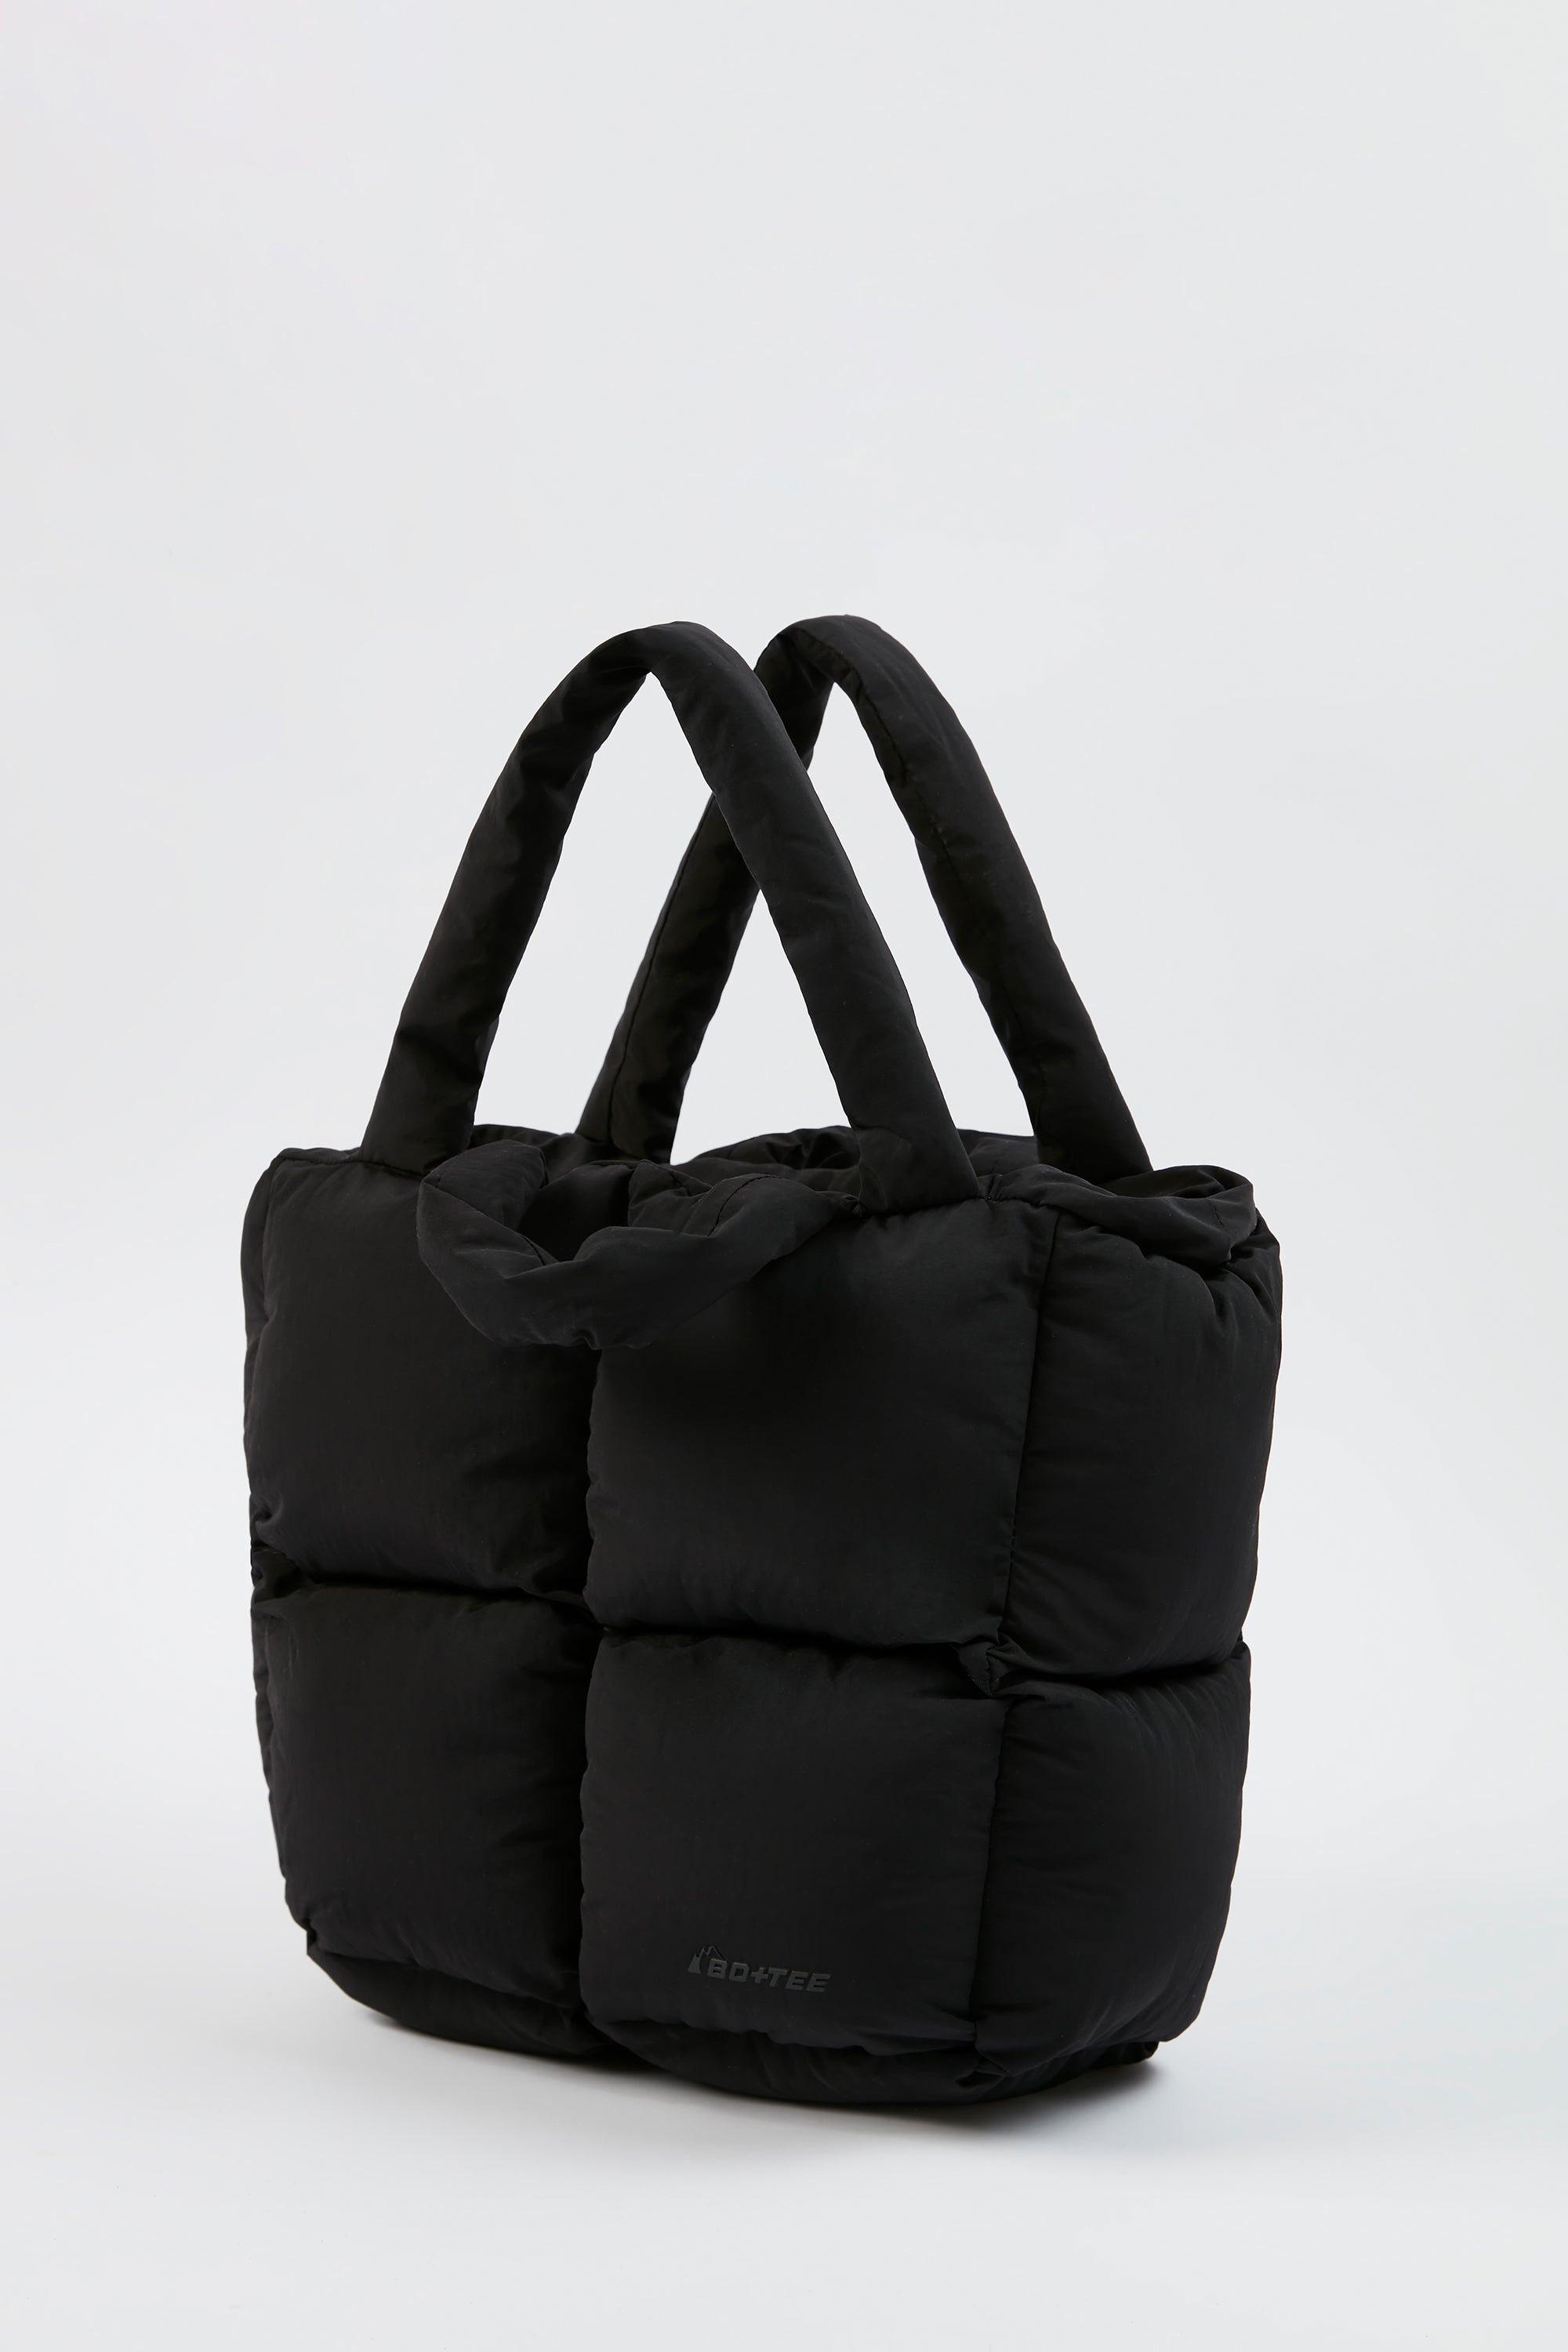 Black Puffer Tote - Quilted Nylon Bag - Oversized Tote Bag - Lulus